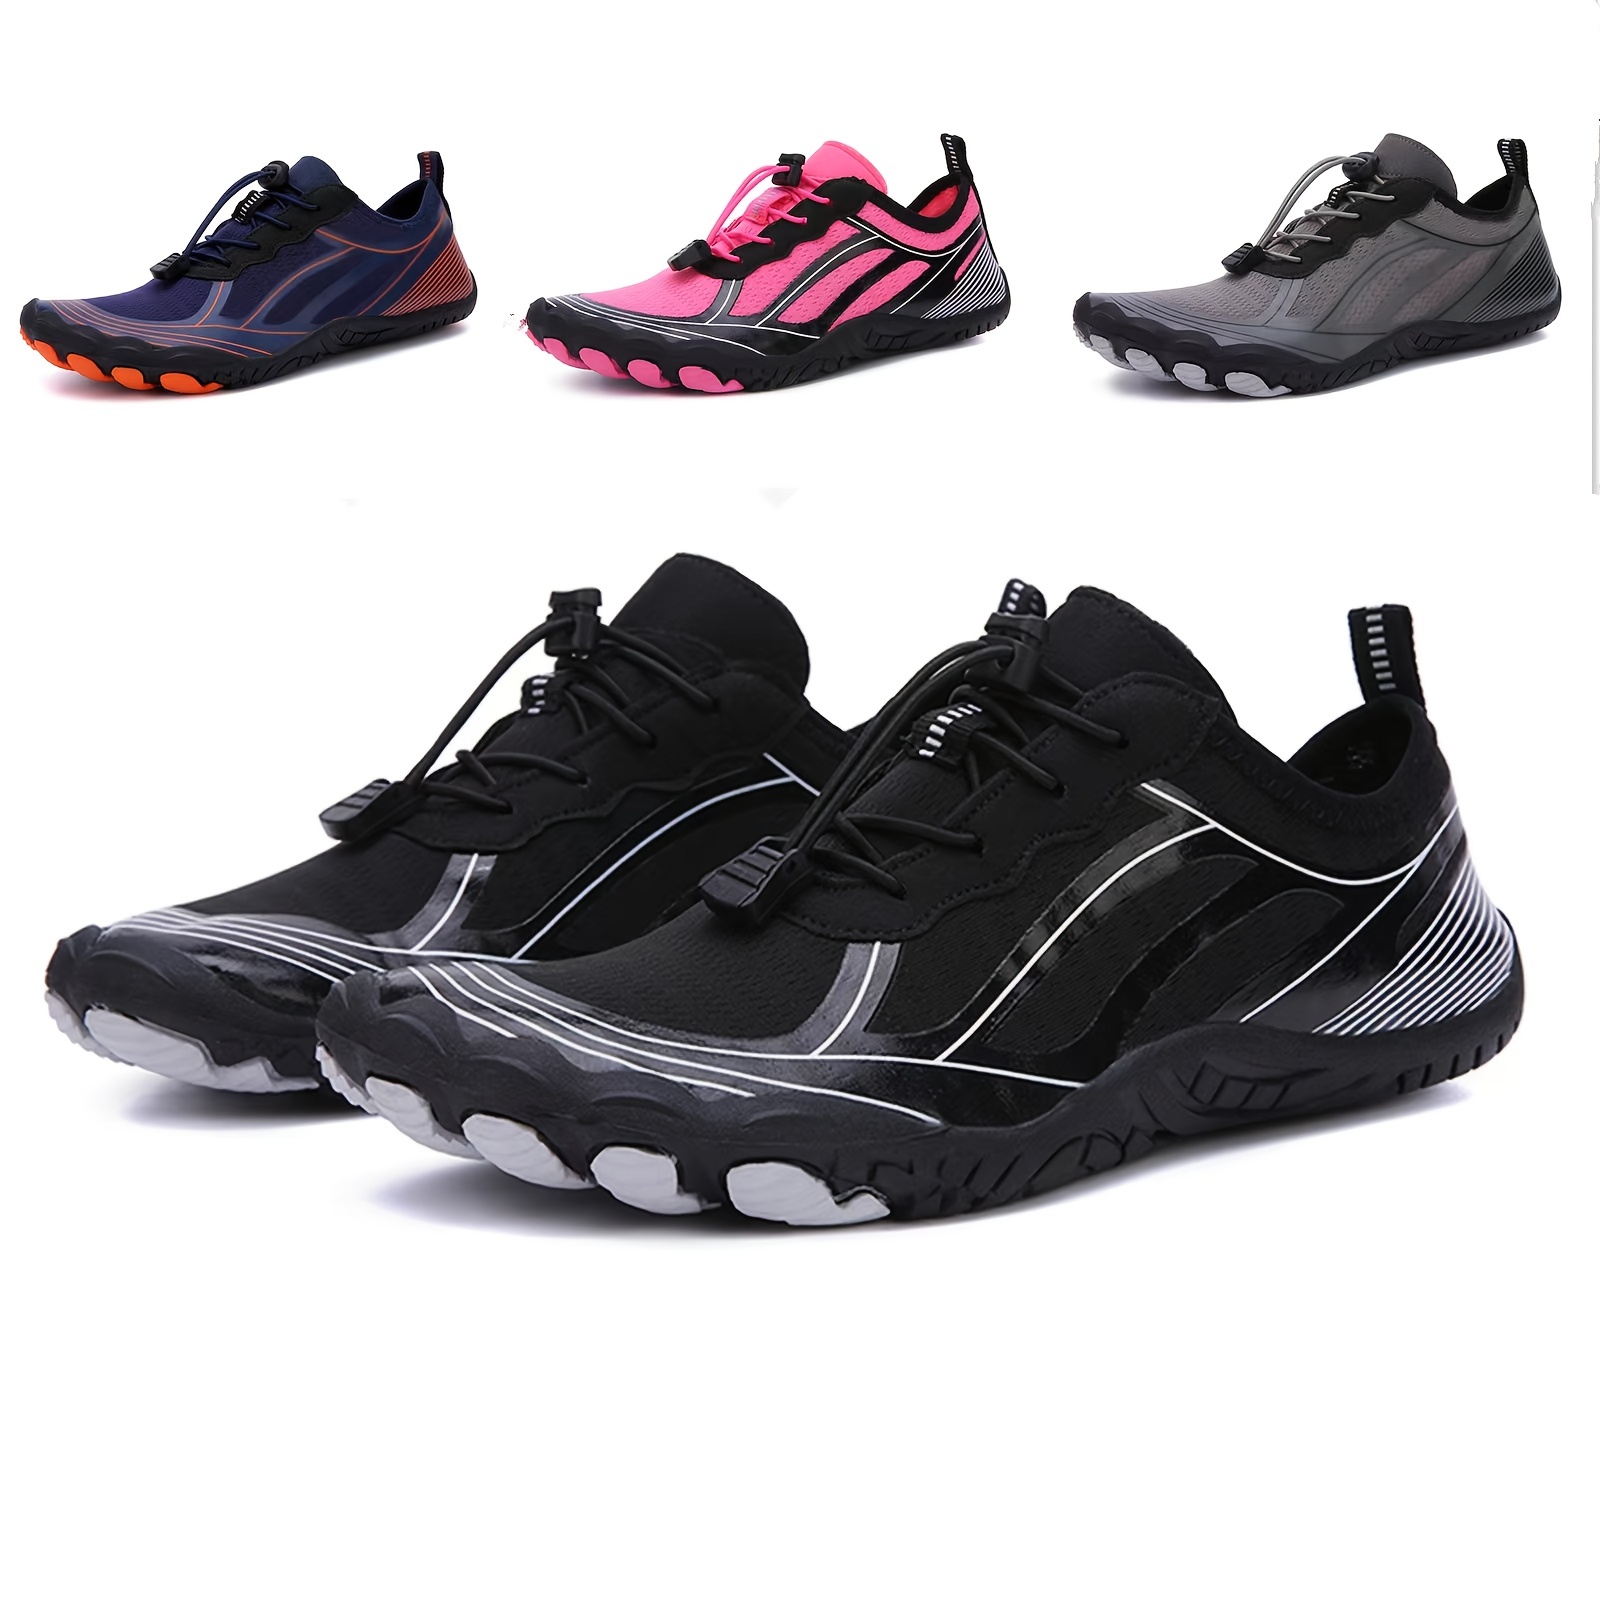 Lightweight Unisex Barefoot Shoes With Quick Dry Technology For